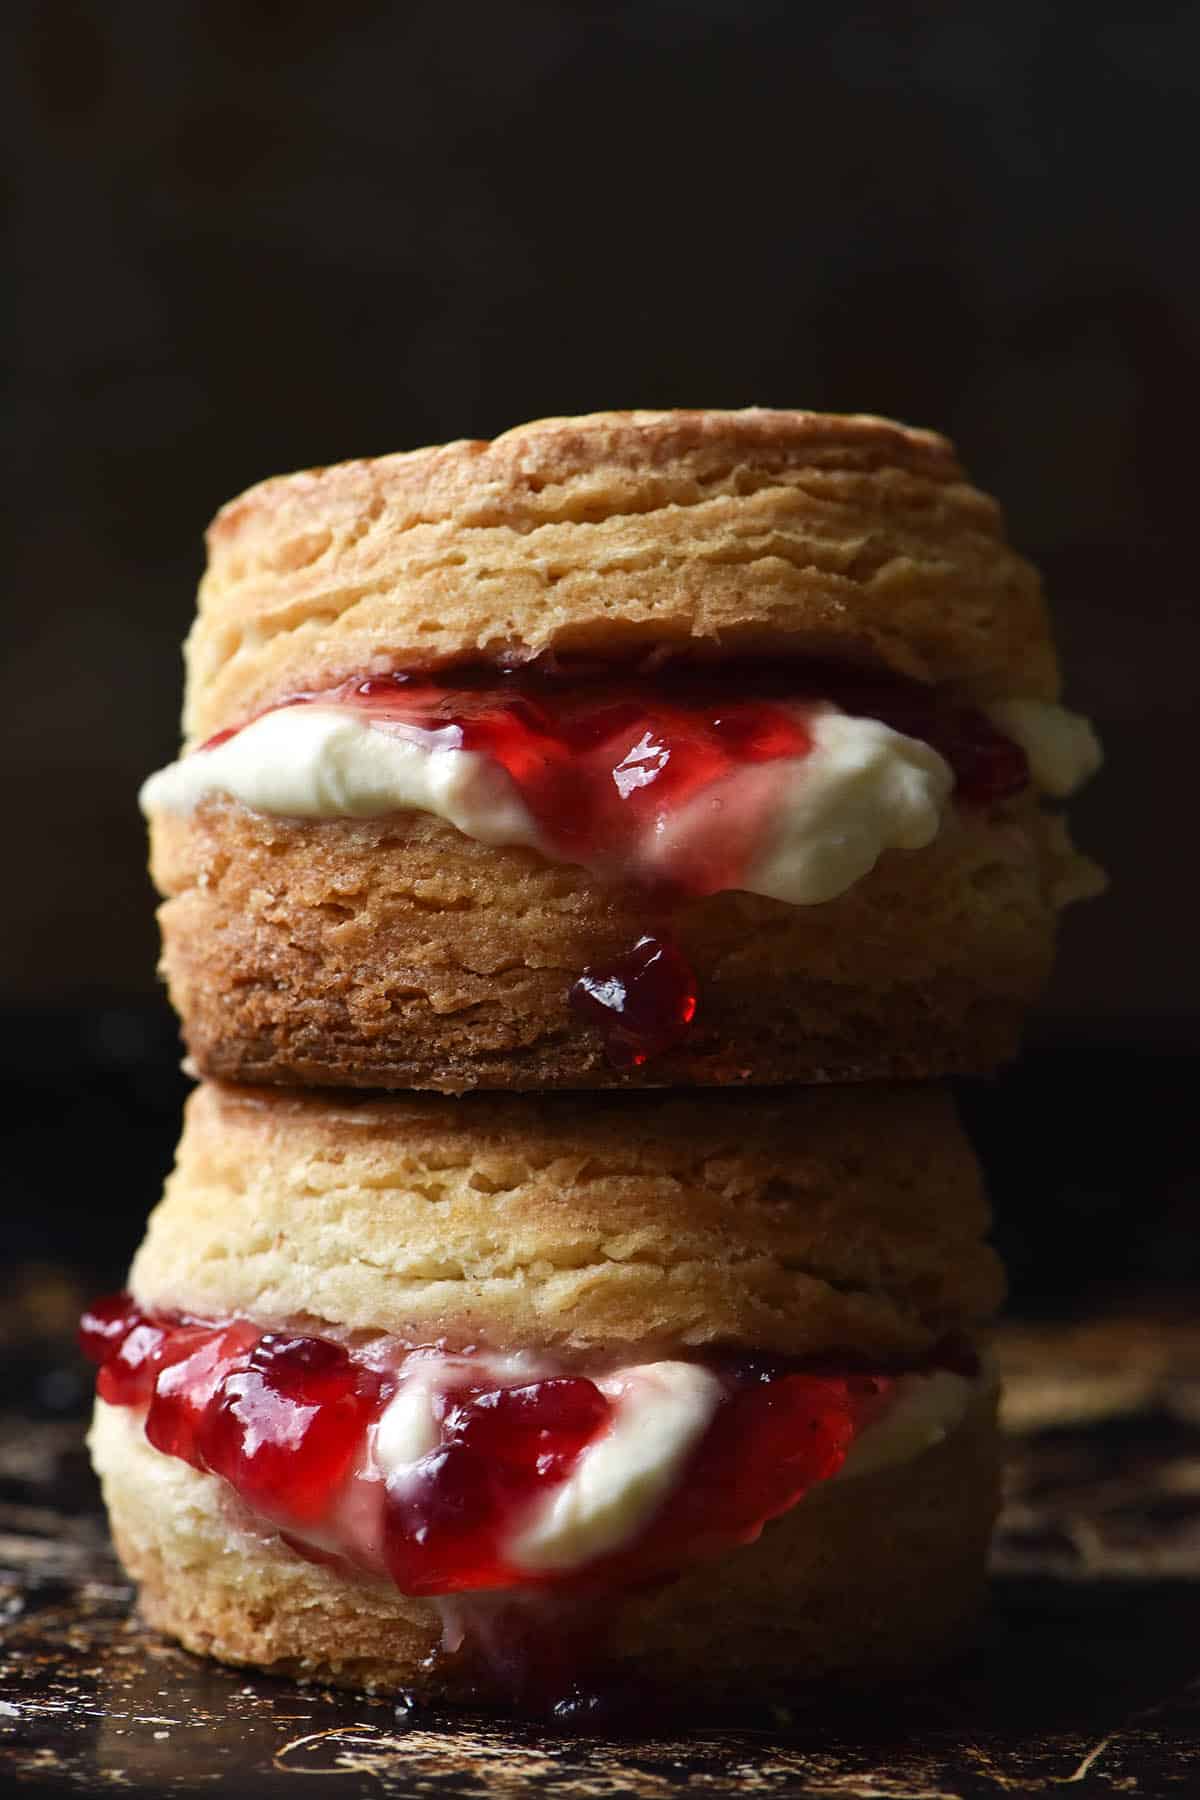 A side on moody image of two gluten free biscuits filled with jam and cream and stacked on top of each other. The biscuits sit on a black tray against a black backdrop. 